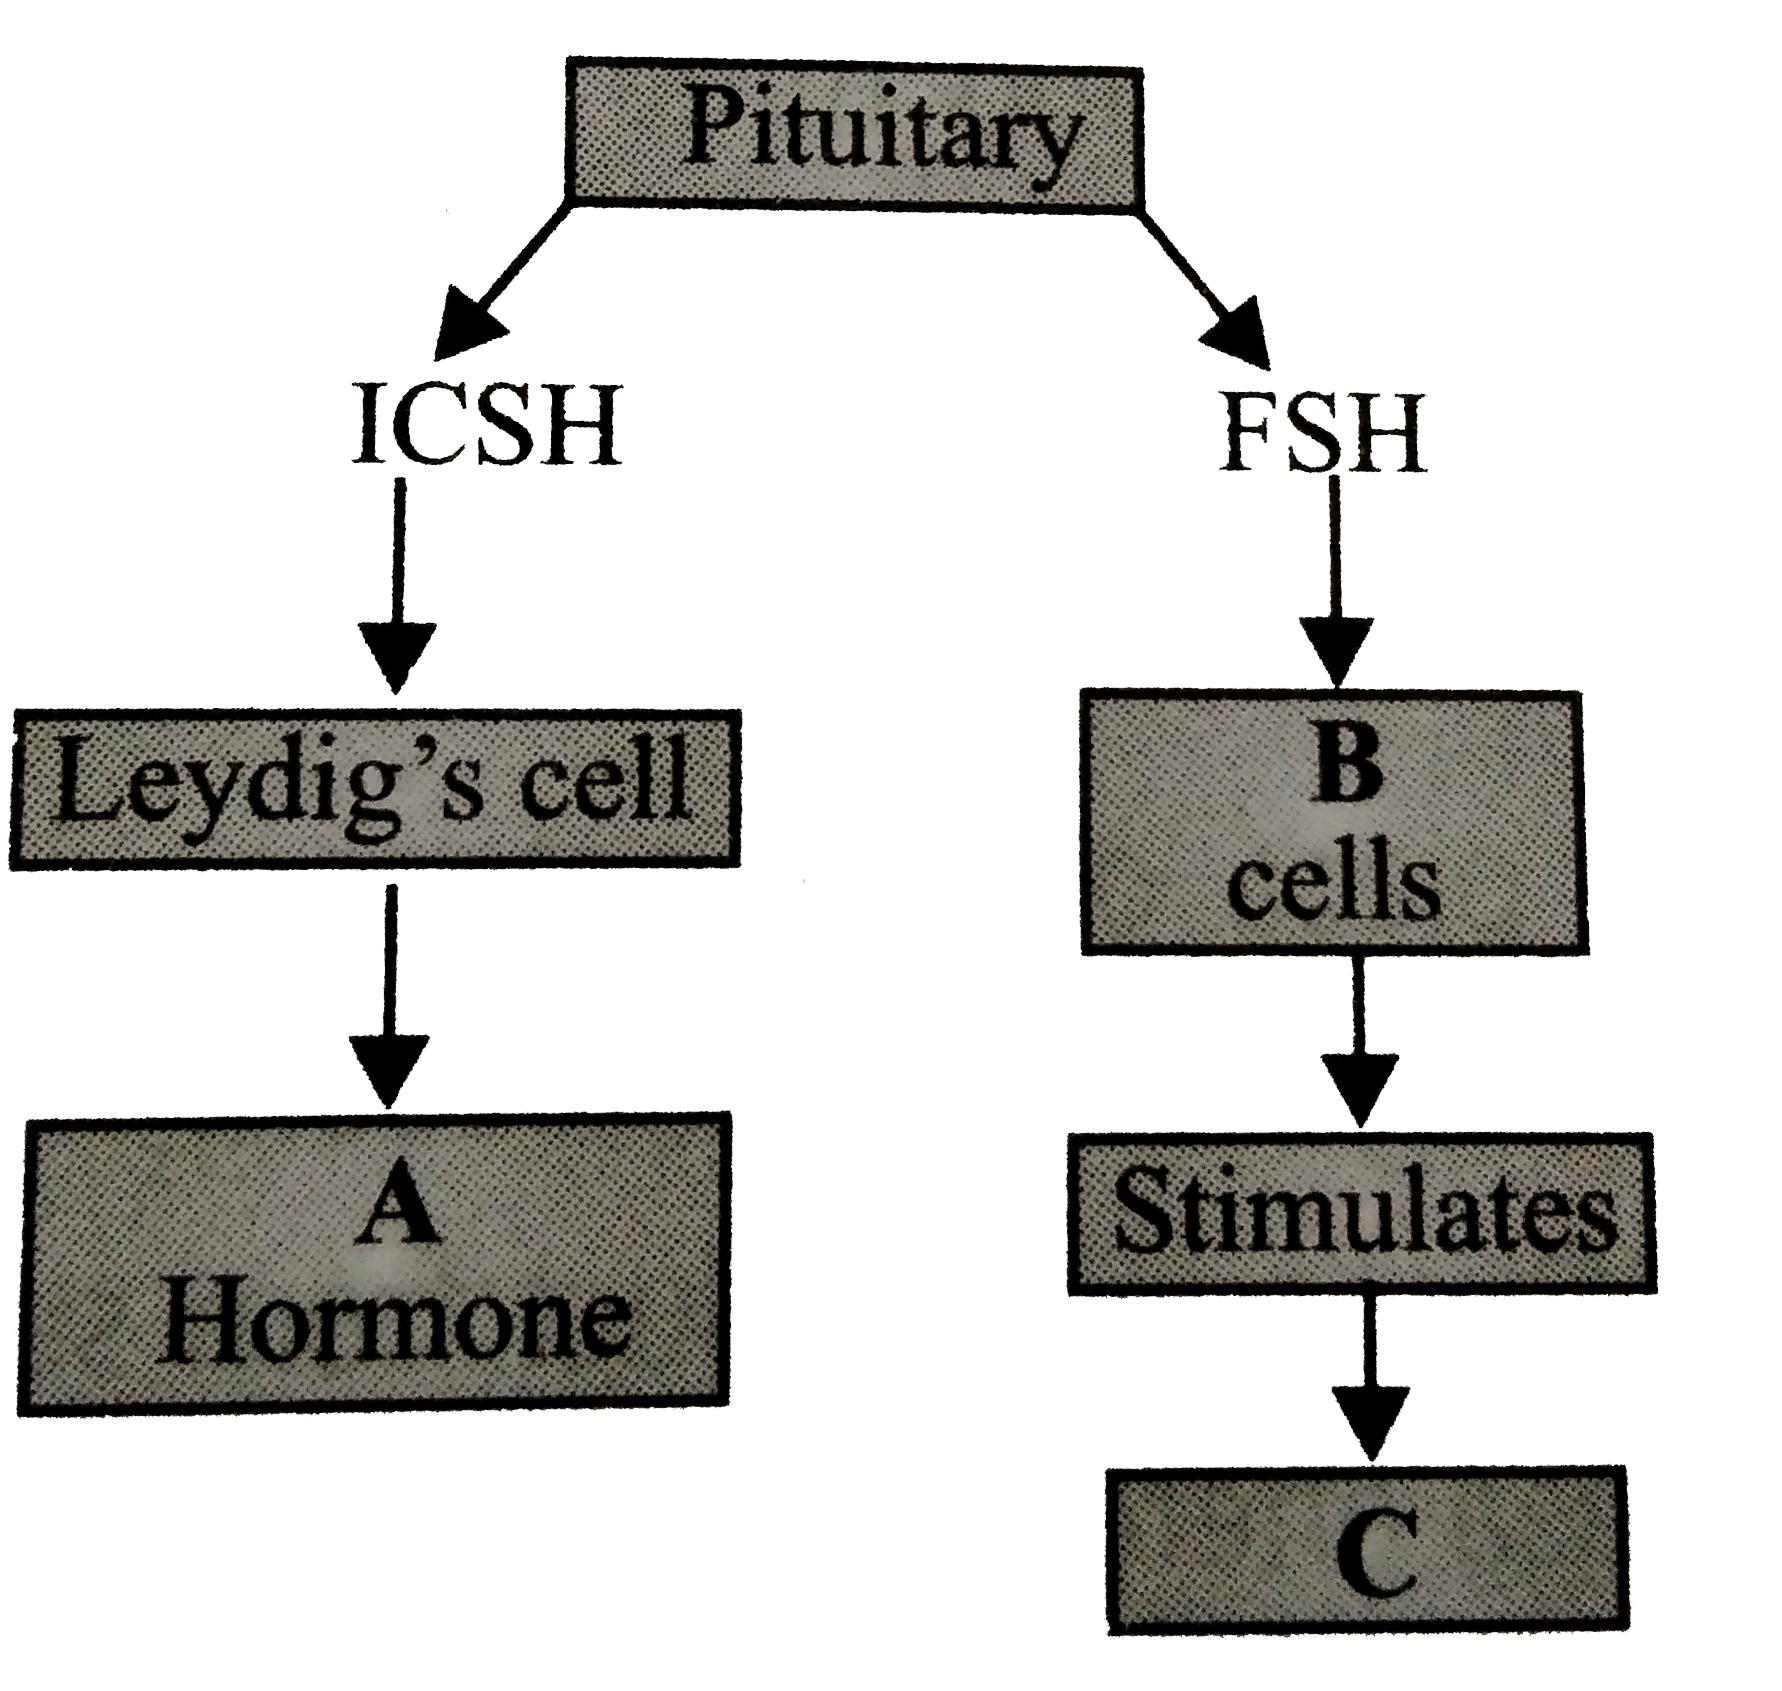 Given below is an incomplete flow chart showing influence of hormones on  gametogensis in males. Observe the flow chart carefully and identify A, B, and C